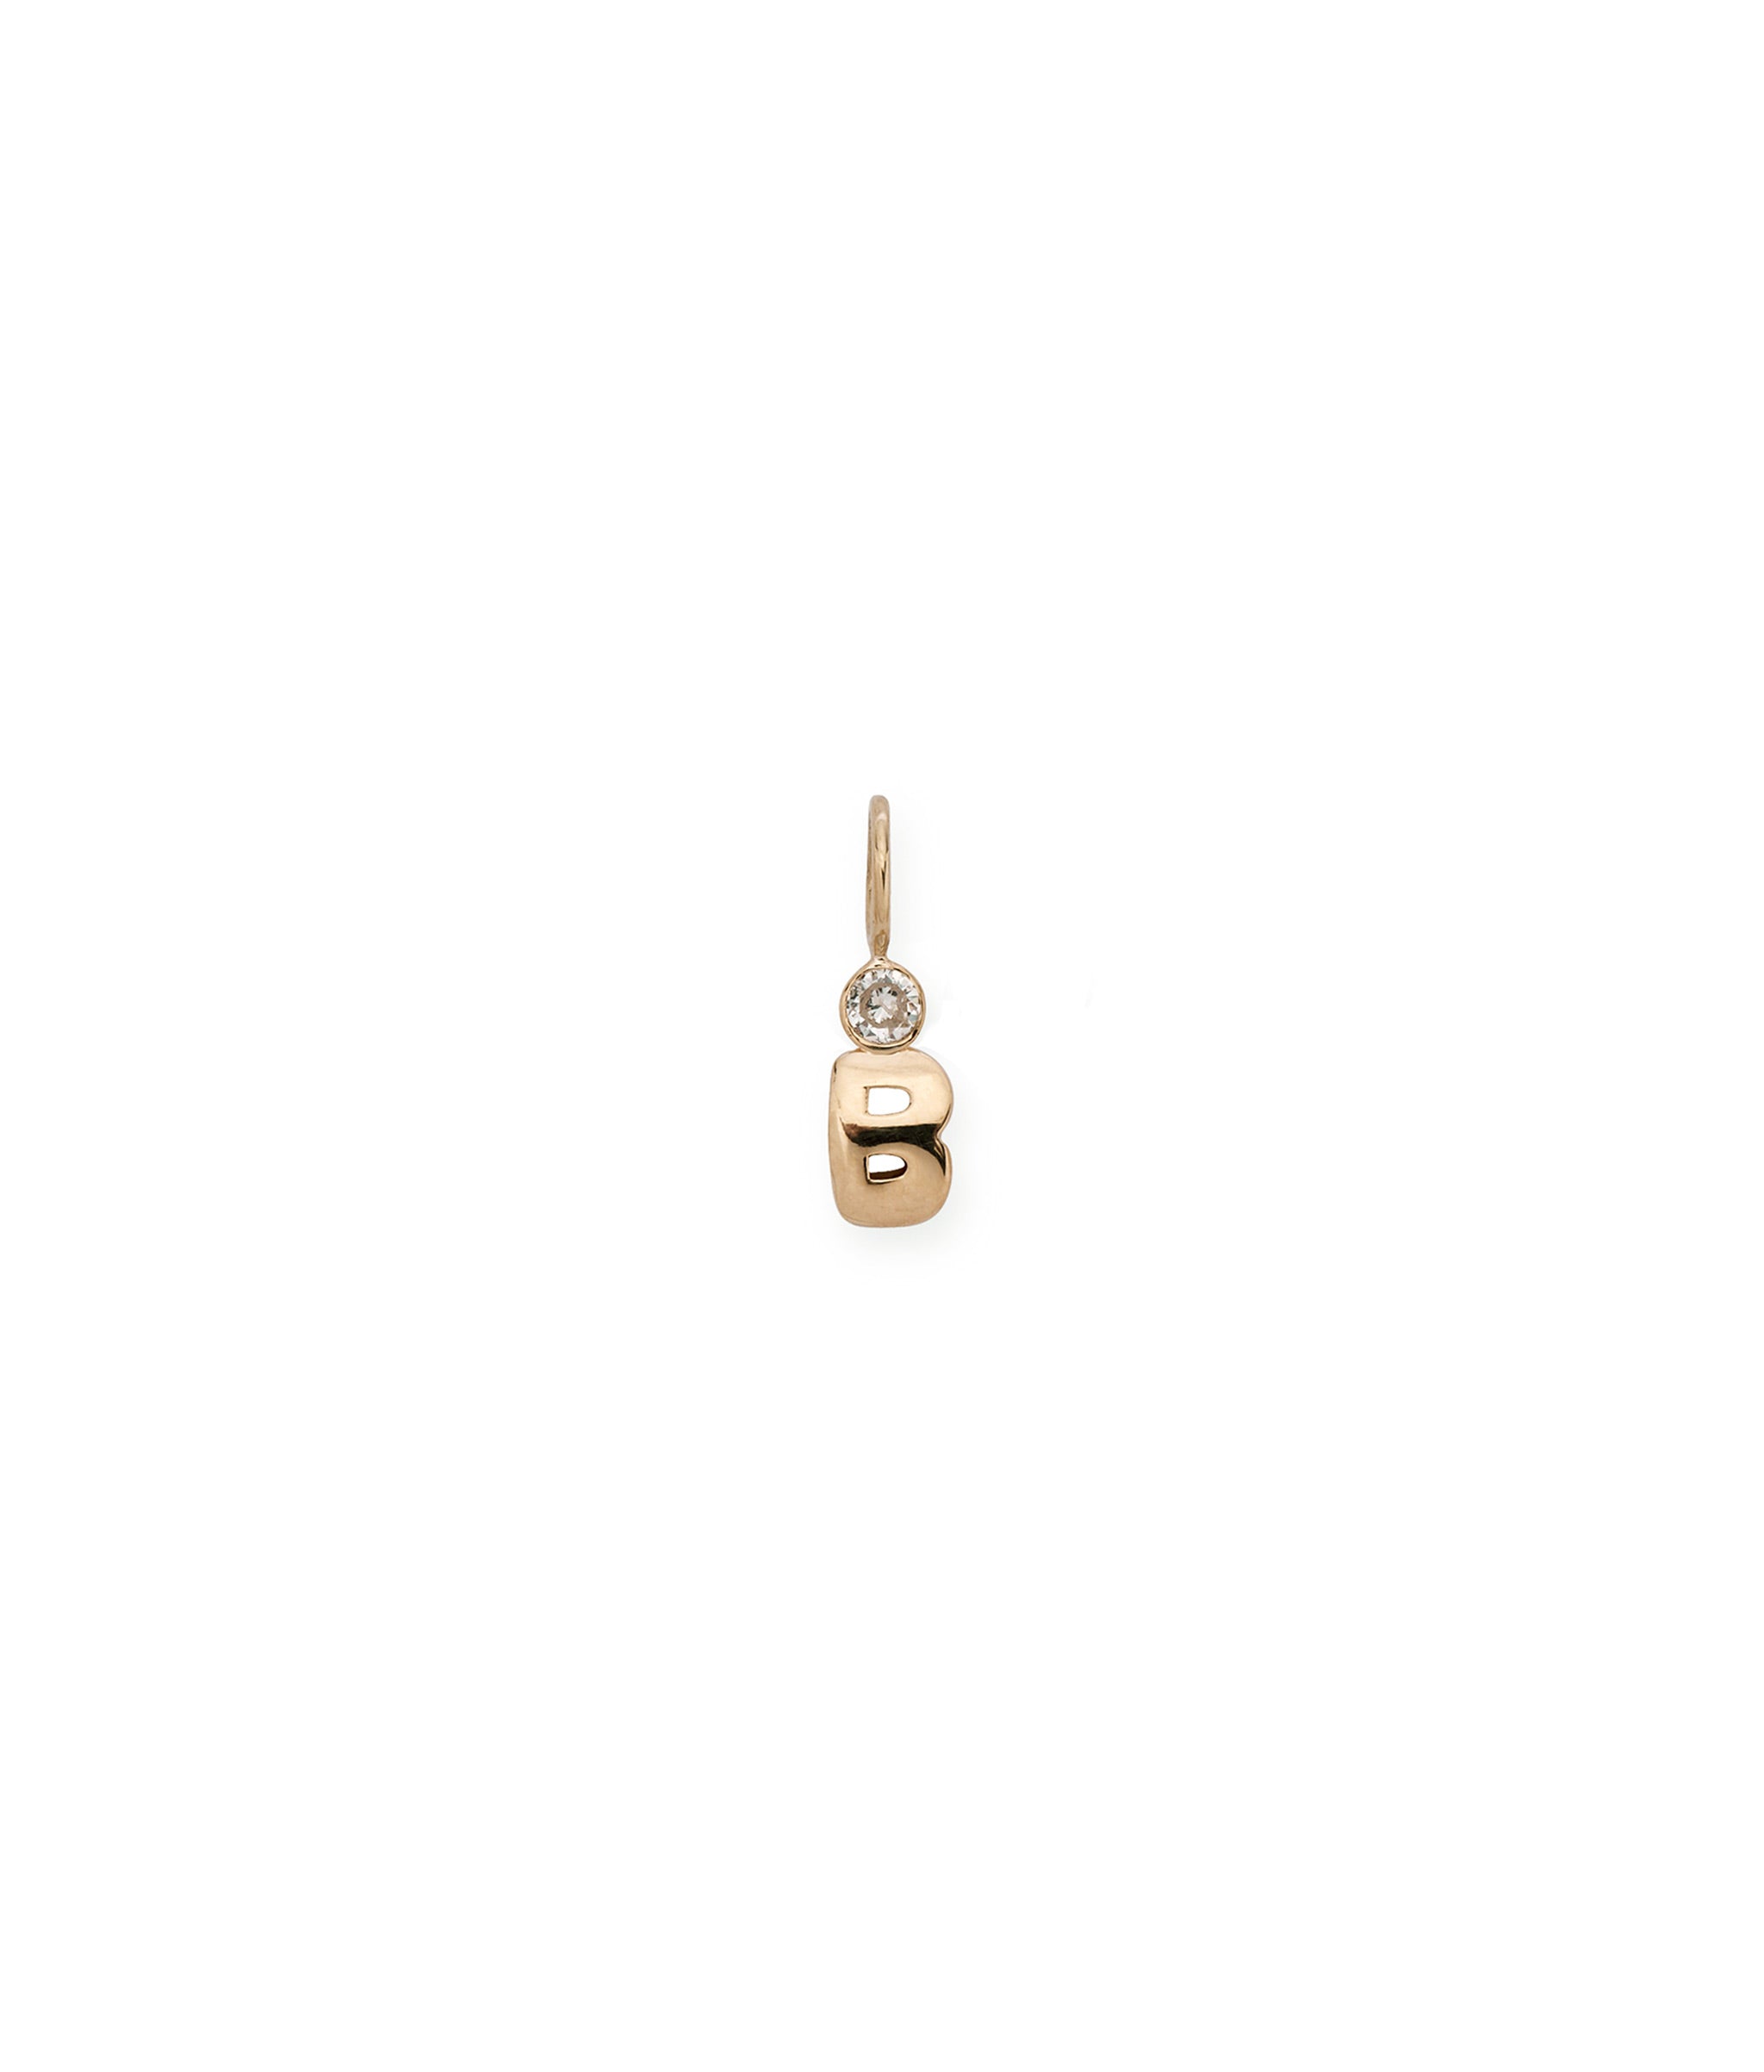 Alphabet Soup "B" Charm. Puffy mini 14k gold letter "B" charm with round diamond accent.